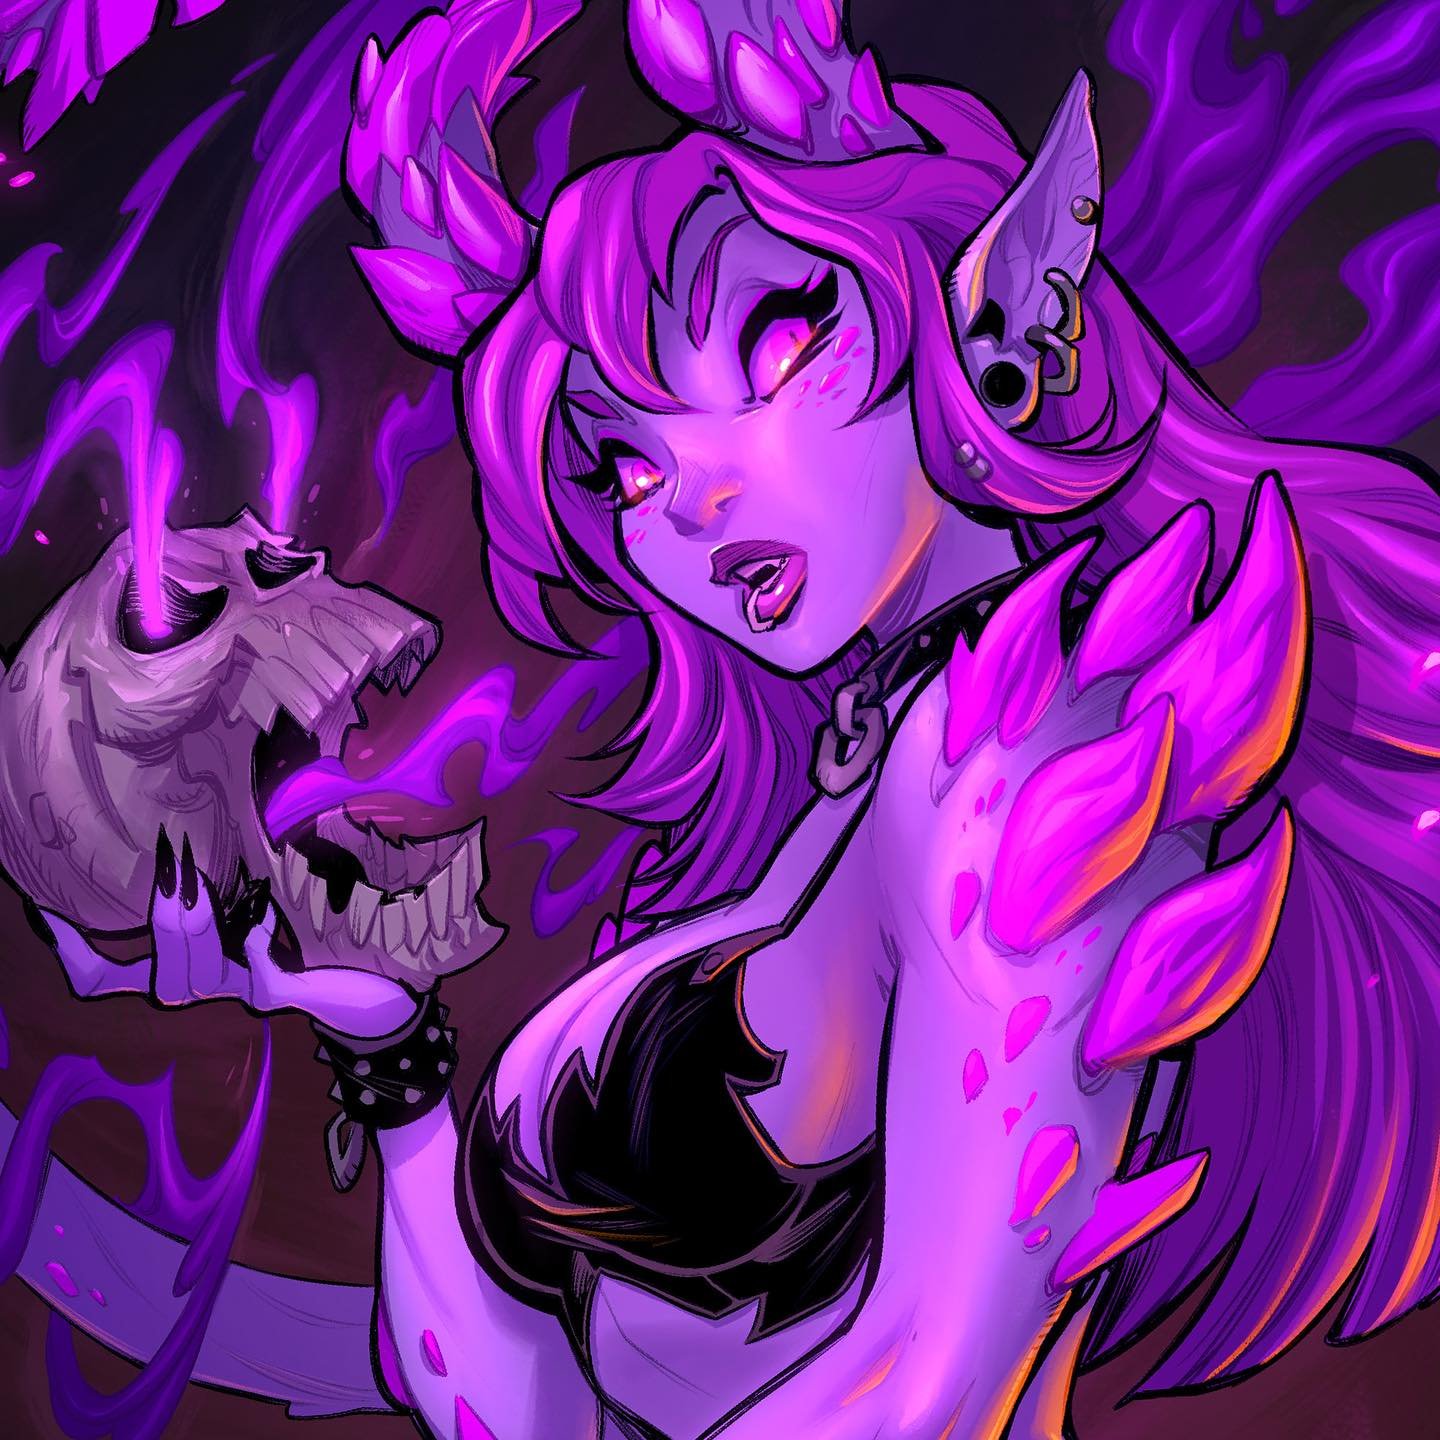 🌟 Limited Time Offer! 🌟 Dive into darkness with my &lsquo;post&rsquo; DREAMHACK convention Demon Girl Prints! Exclusive to our online store for ONE WEEK ONLY! Each A3 print is signed and comes with a seal of authenticity. Free worldwide shipping! O